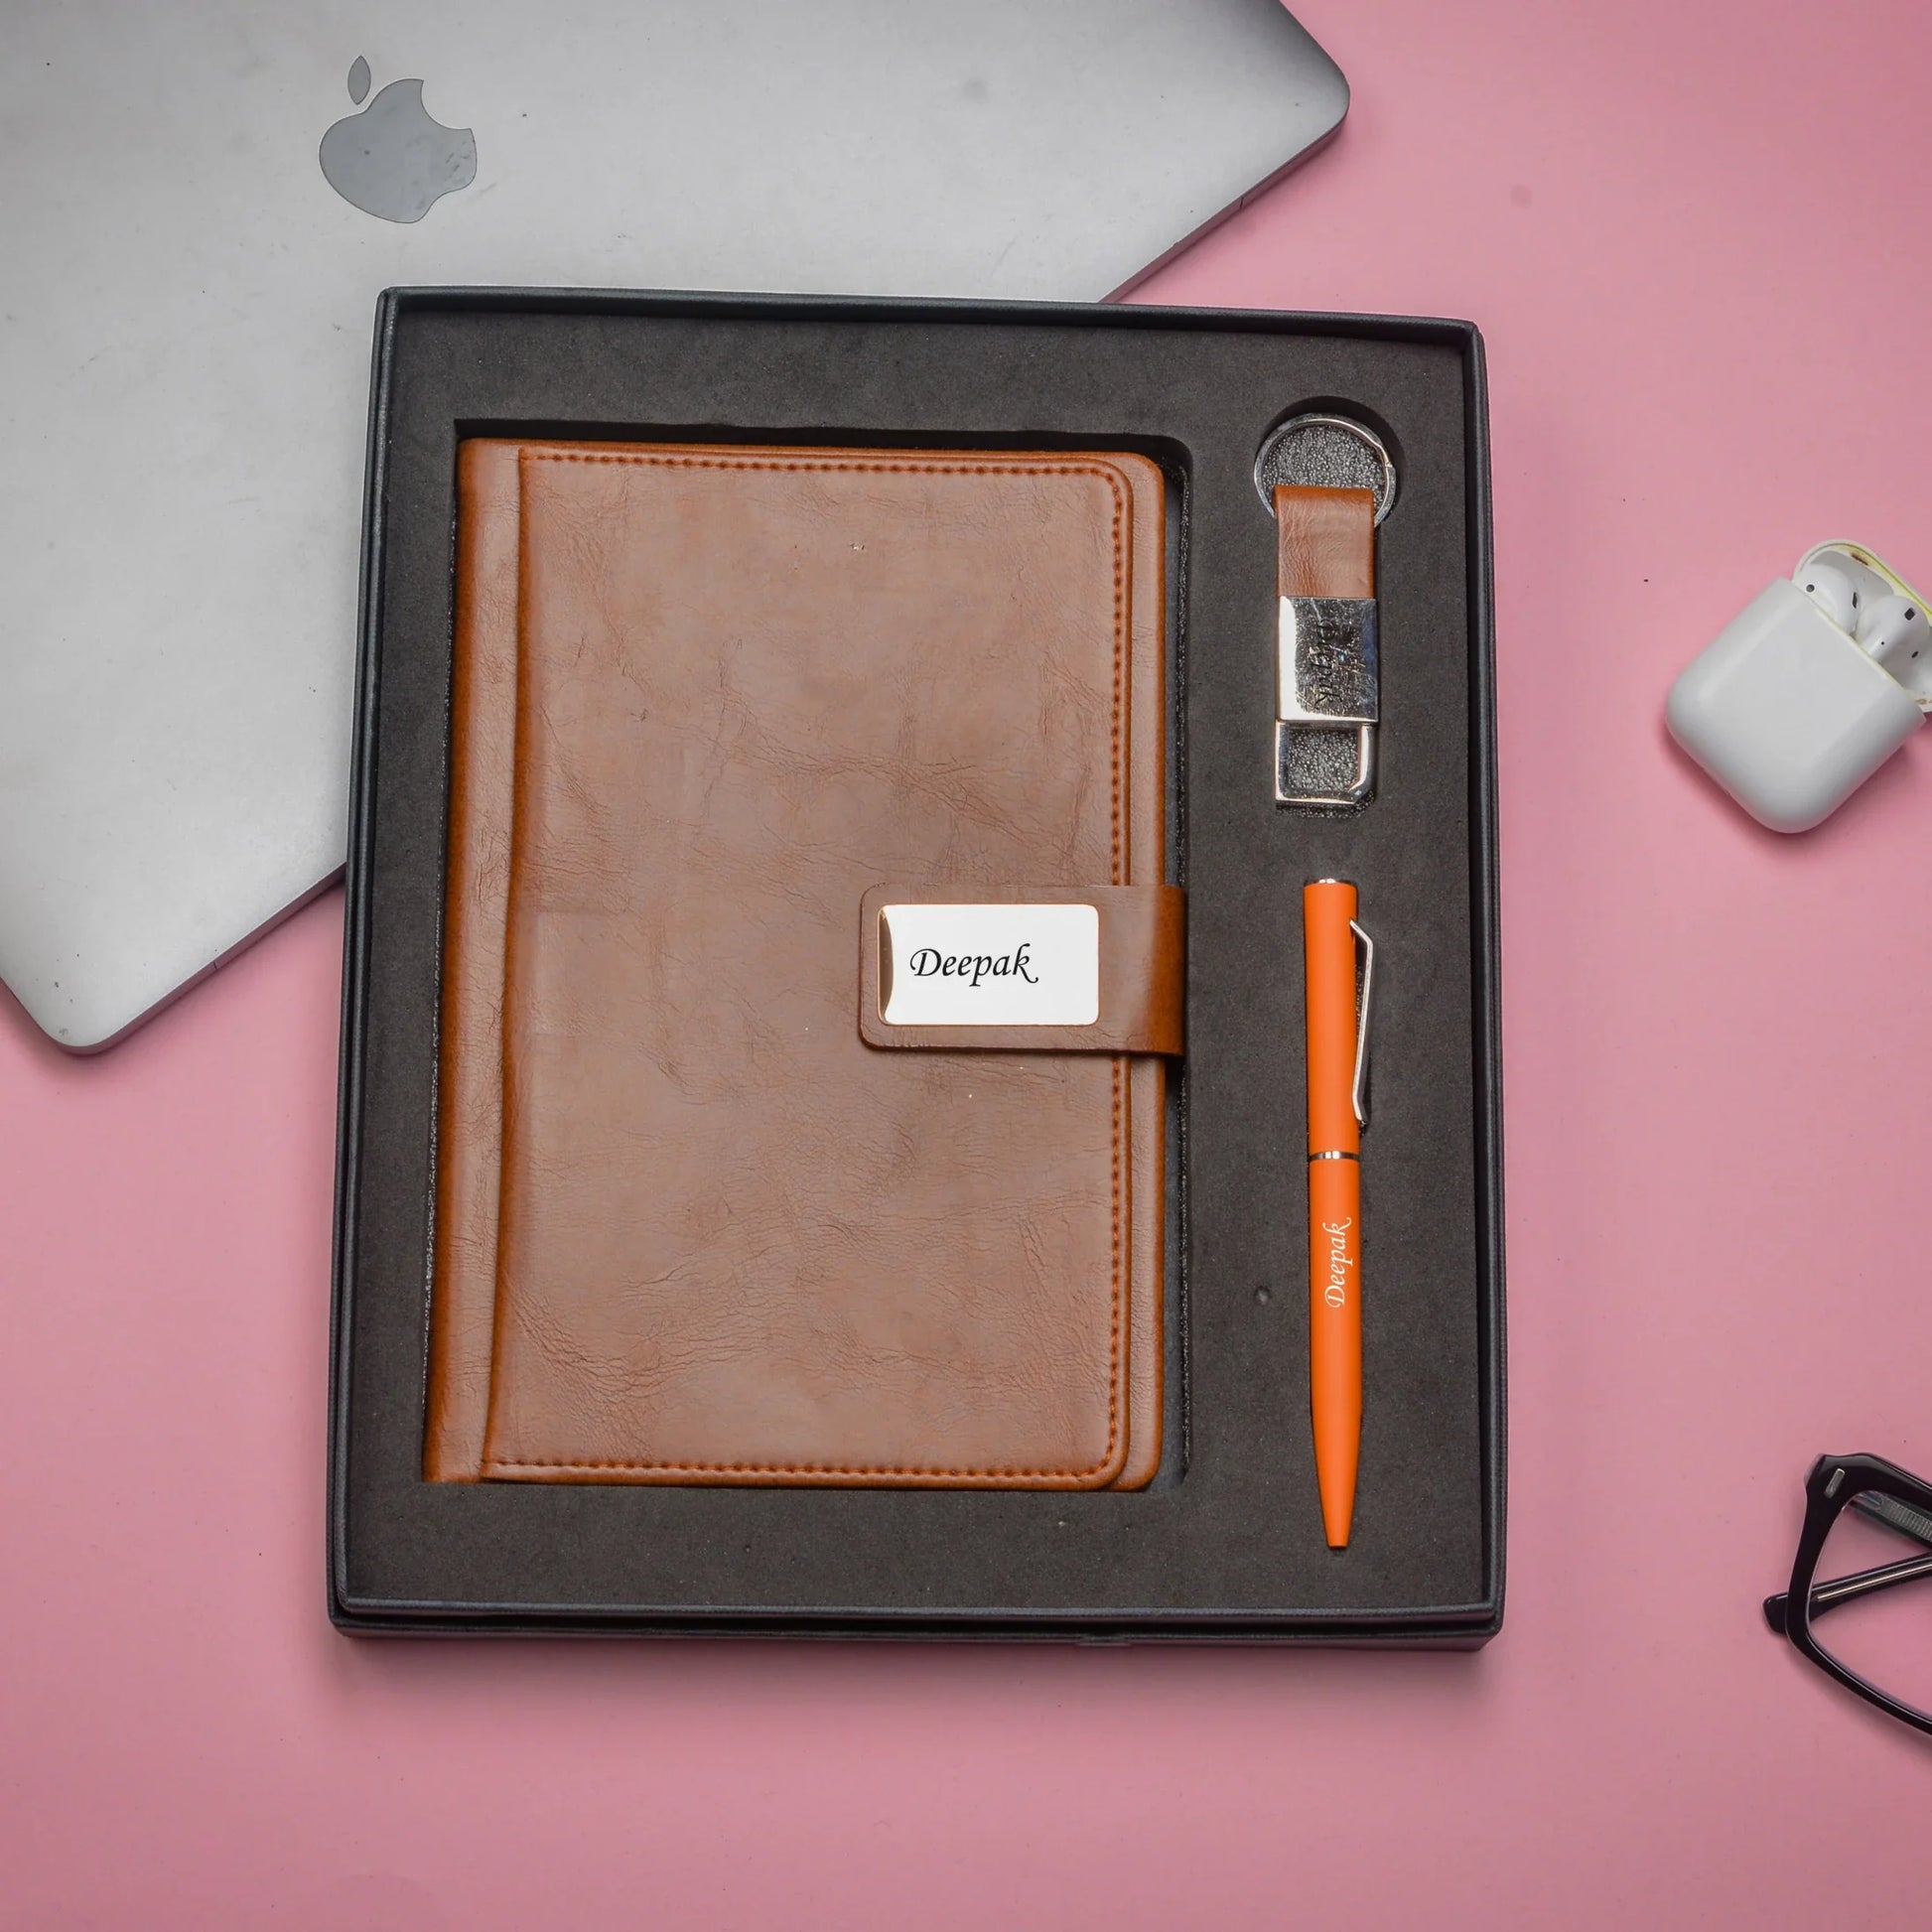 "Get the job done with our durable and reliable corporate combo. Our tough diary, strong pen, and sturdy keychain will help you take on any challenge with confidence."